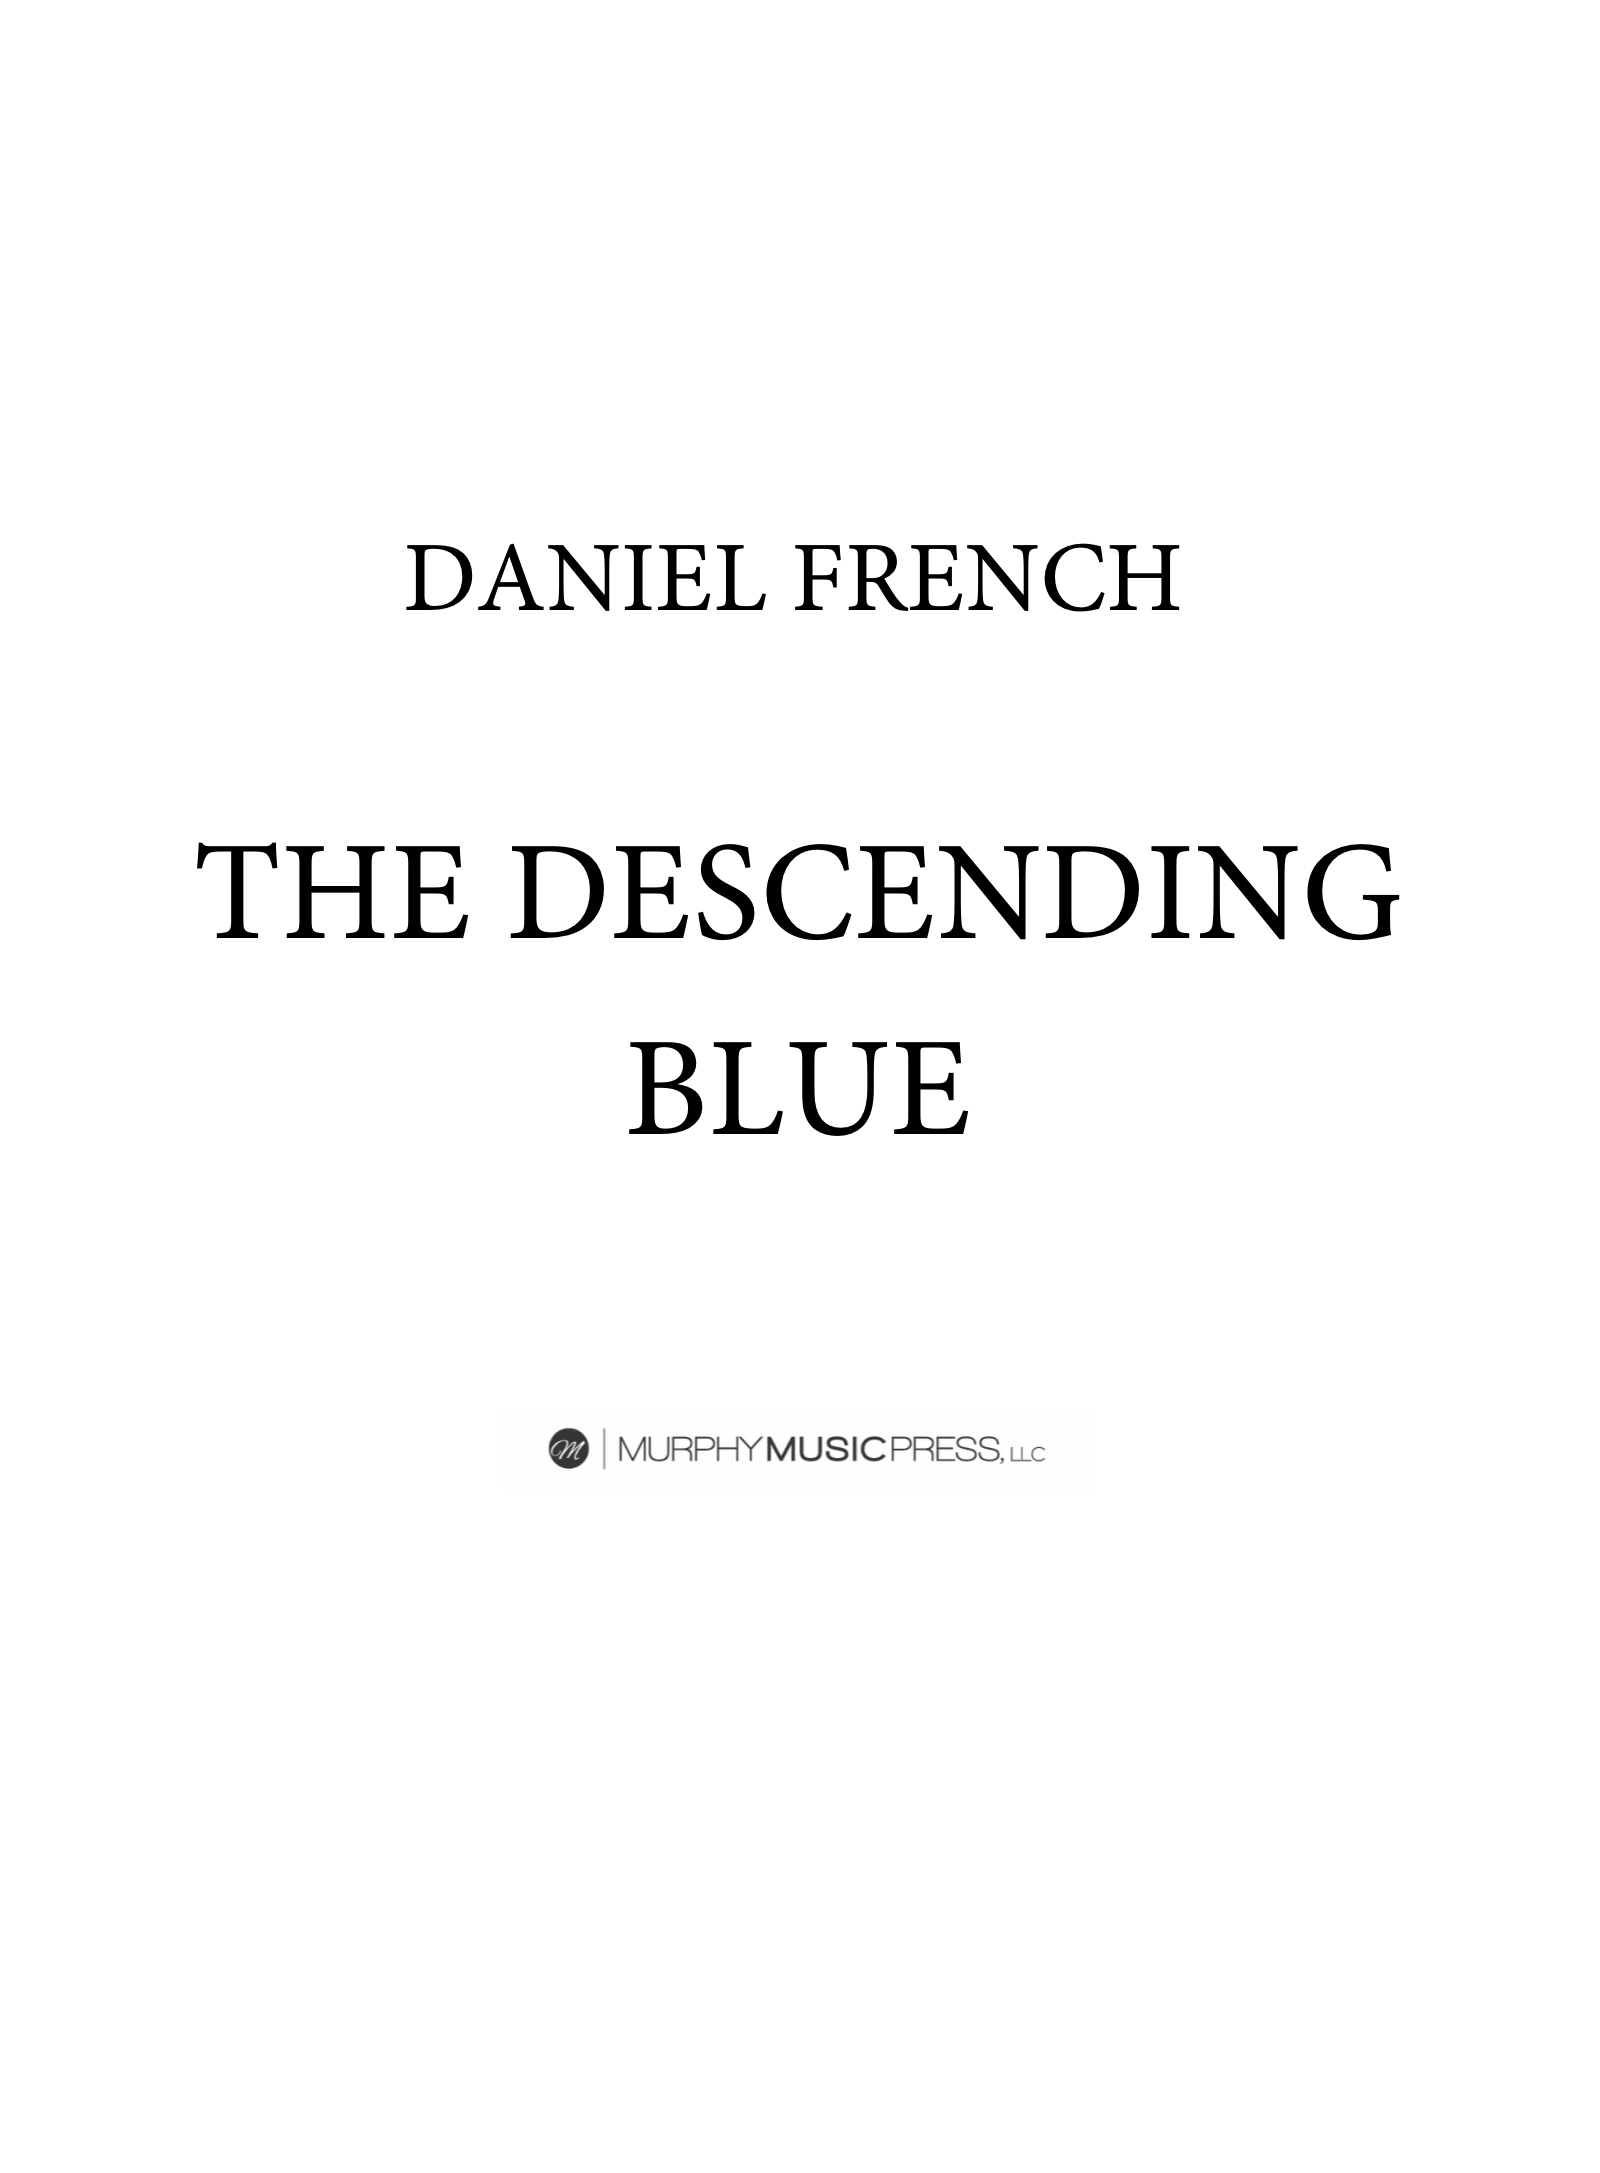 The Descending Blue by Daniel French